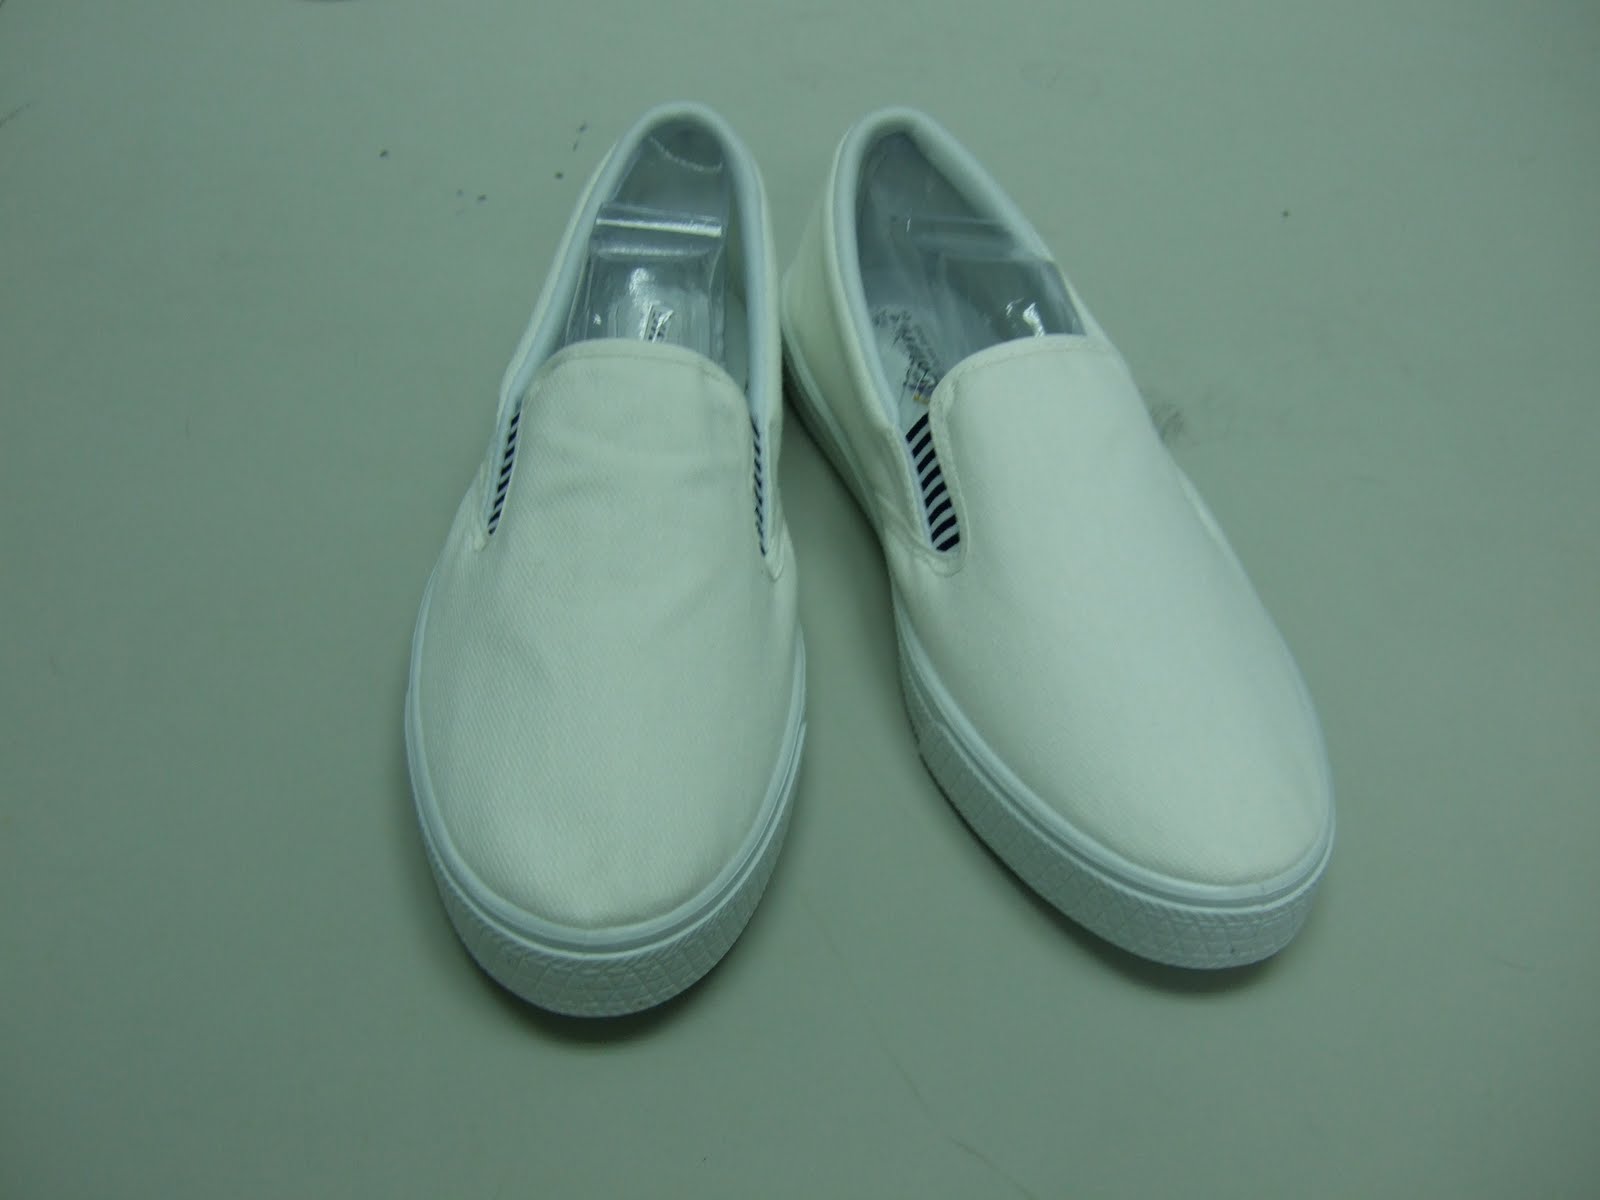 Yume&Hoja hand-painted team: Two basic canvas shoes types